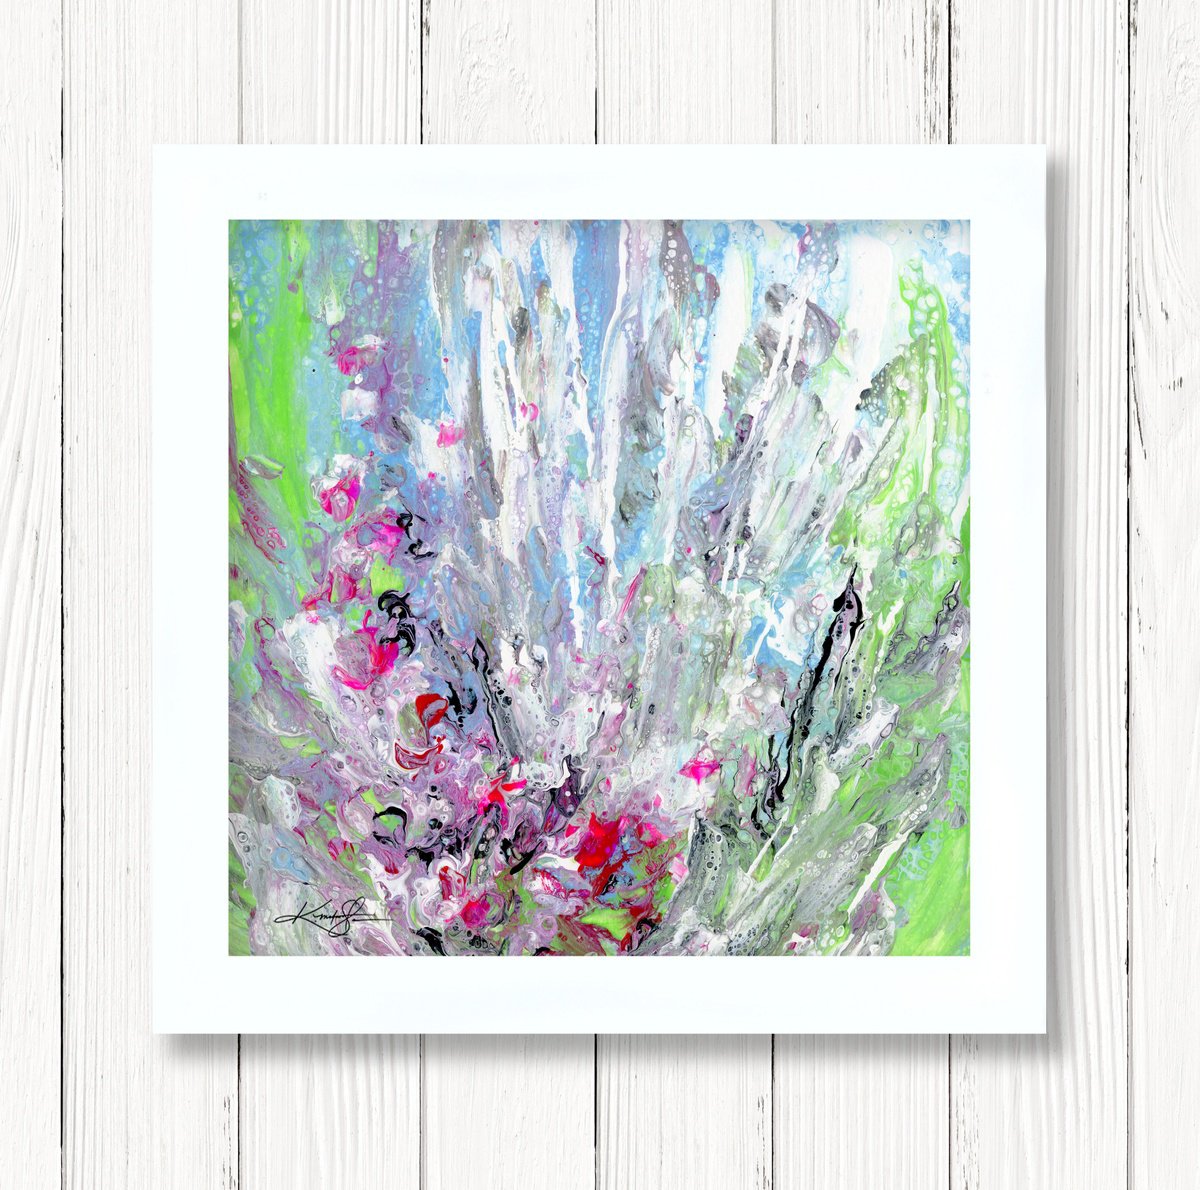 Floral Jubilee 37 - Framed Abstract Floral Art by Kathy Morton Stanion by Kathy Morton Stanion